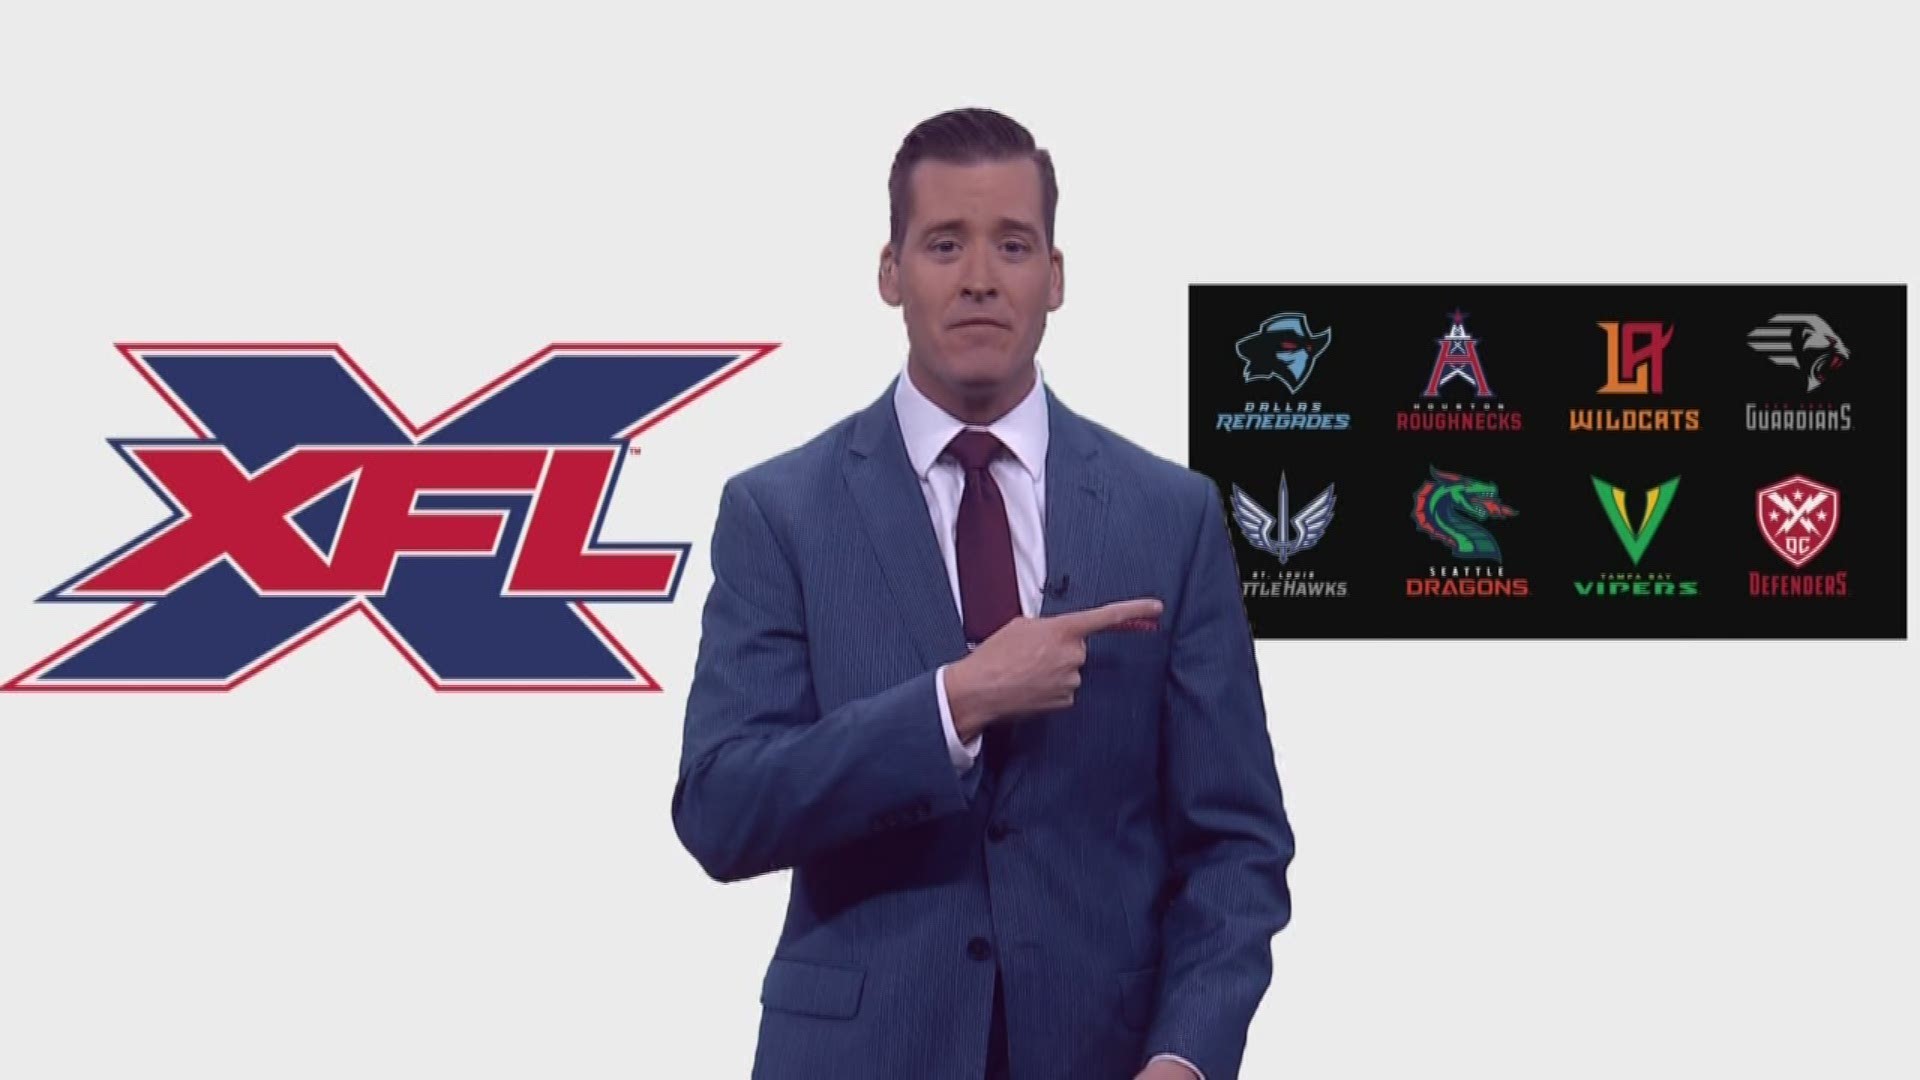 The fledgling XFL released a list of franchise cities, team names, and logos on Wednesday. The football league, which will be operated as a part of World Wrestling Entertainment, will have franchises in Dallas, New York, Washington DC, Tampa Bay, Los Angeles, Seattle, Houston, and St. Louis. Although the teams have cities and names, so far the league has just one player, former Pittsburgh Steelers and Oklahoma Sooners Quarterback Landry Jones.